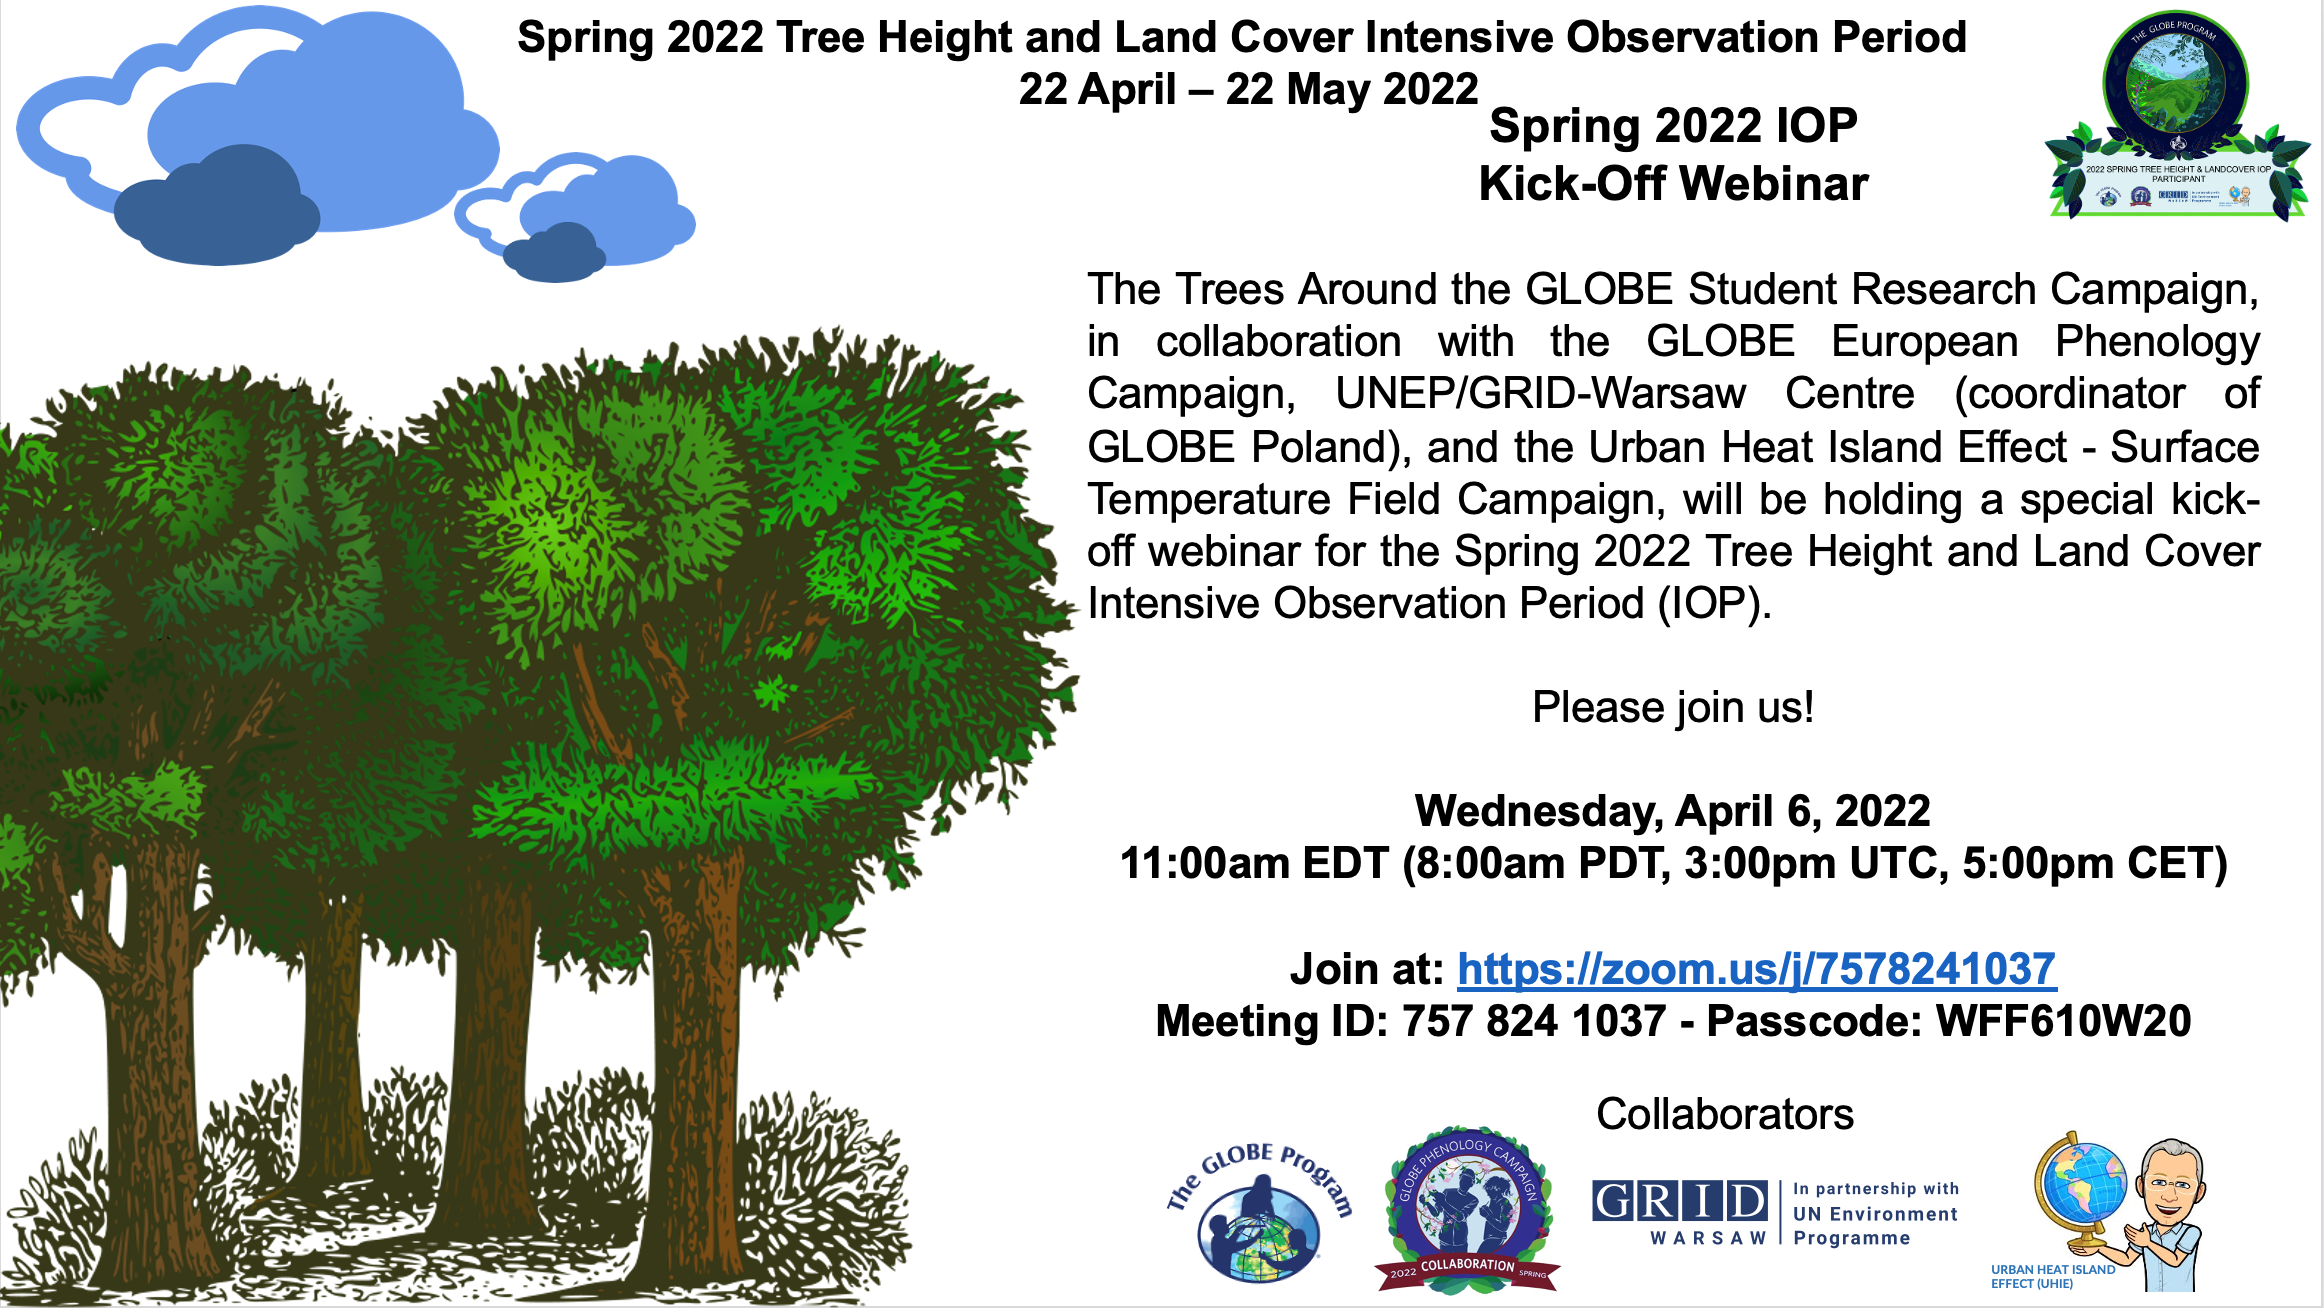 Spring 2022 Tree Height and Land Cover IOP shareable, with the description of the event